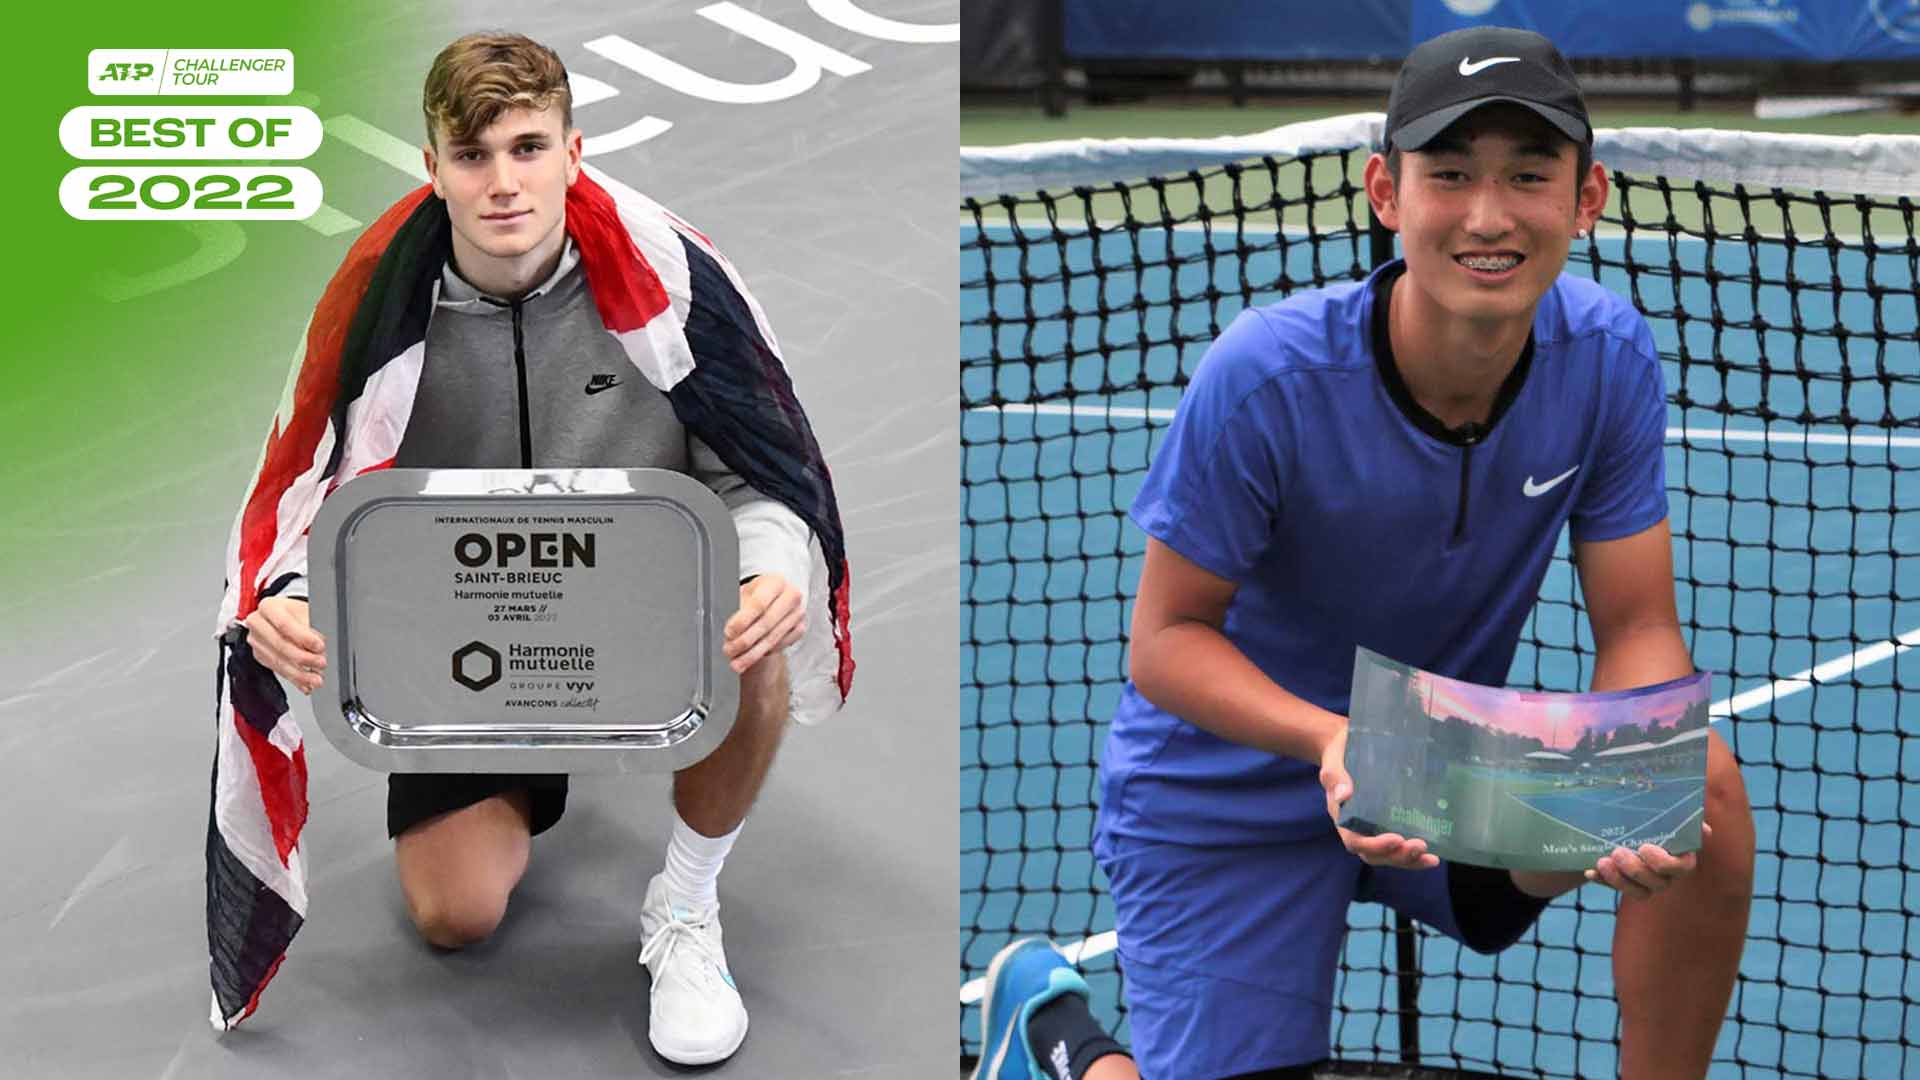 Jack Draper (left) and Shang Juncheng were among #NextGenATP youngsters to win a Challenger title this season.